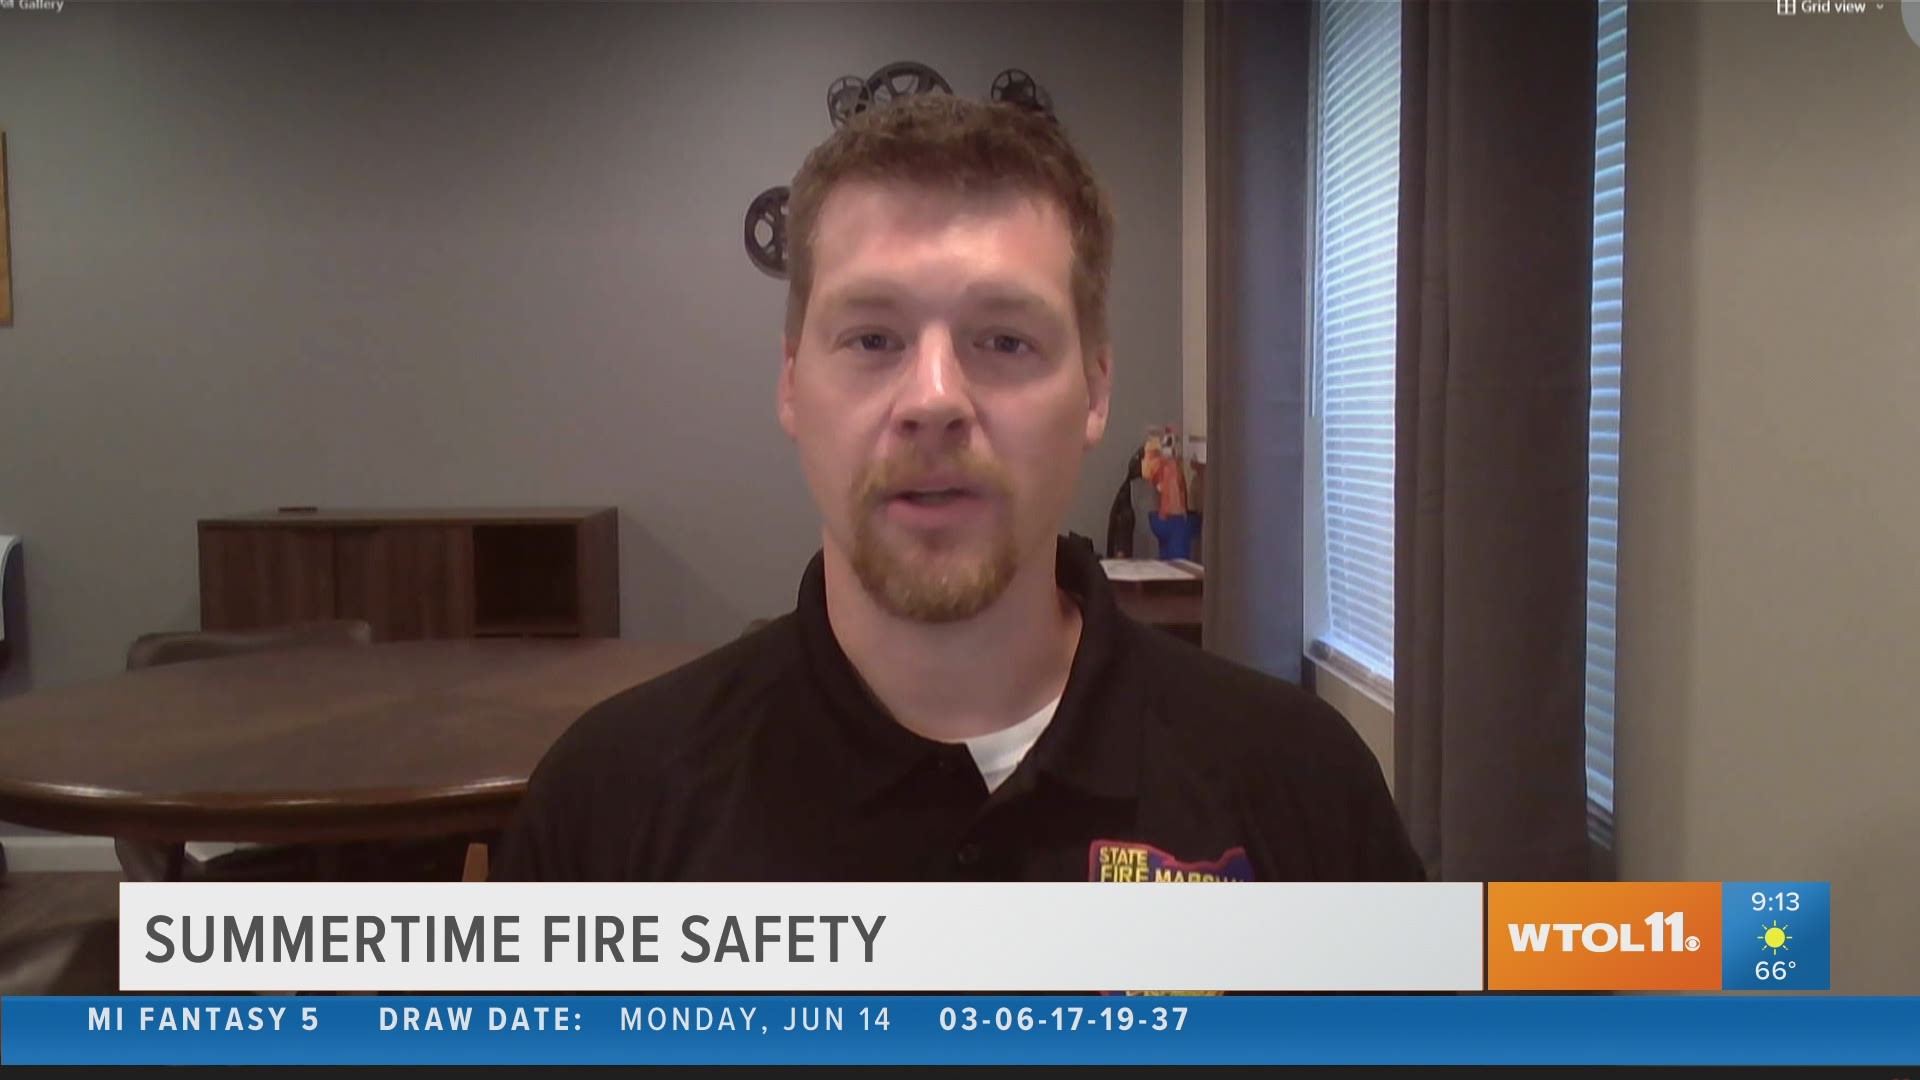 The State Fire Marshal's Office shares fire safety tips, from campfires to grilling to fireworks.